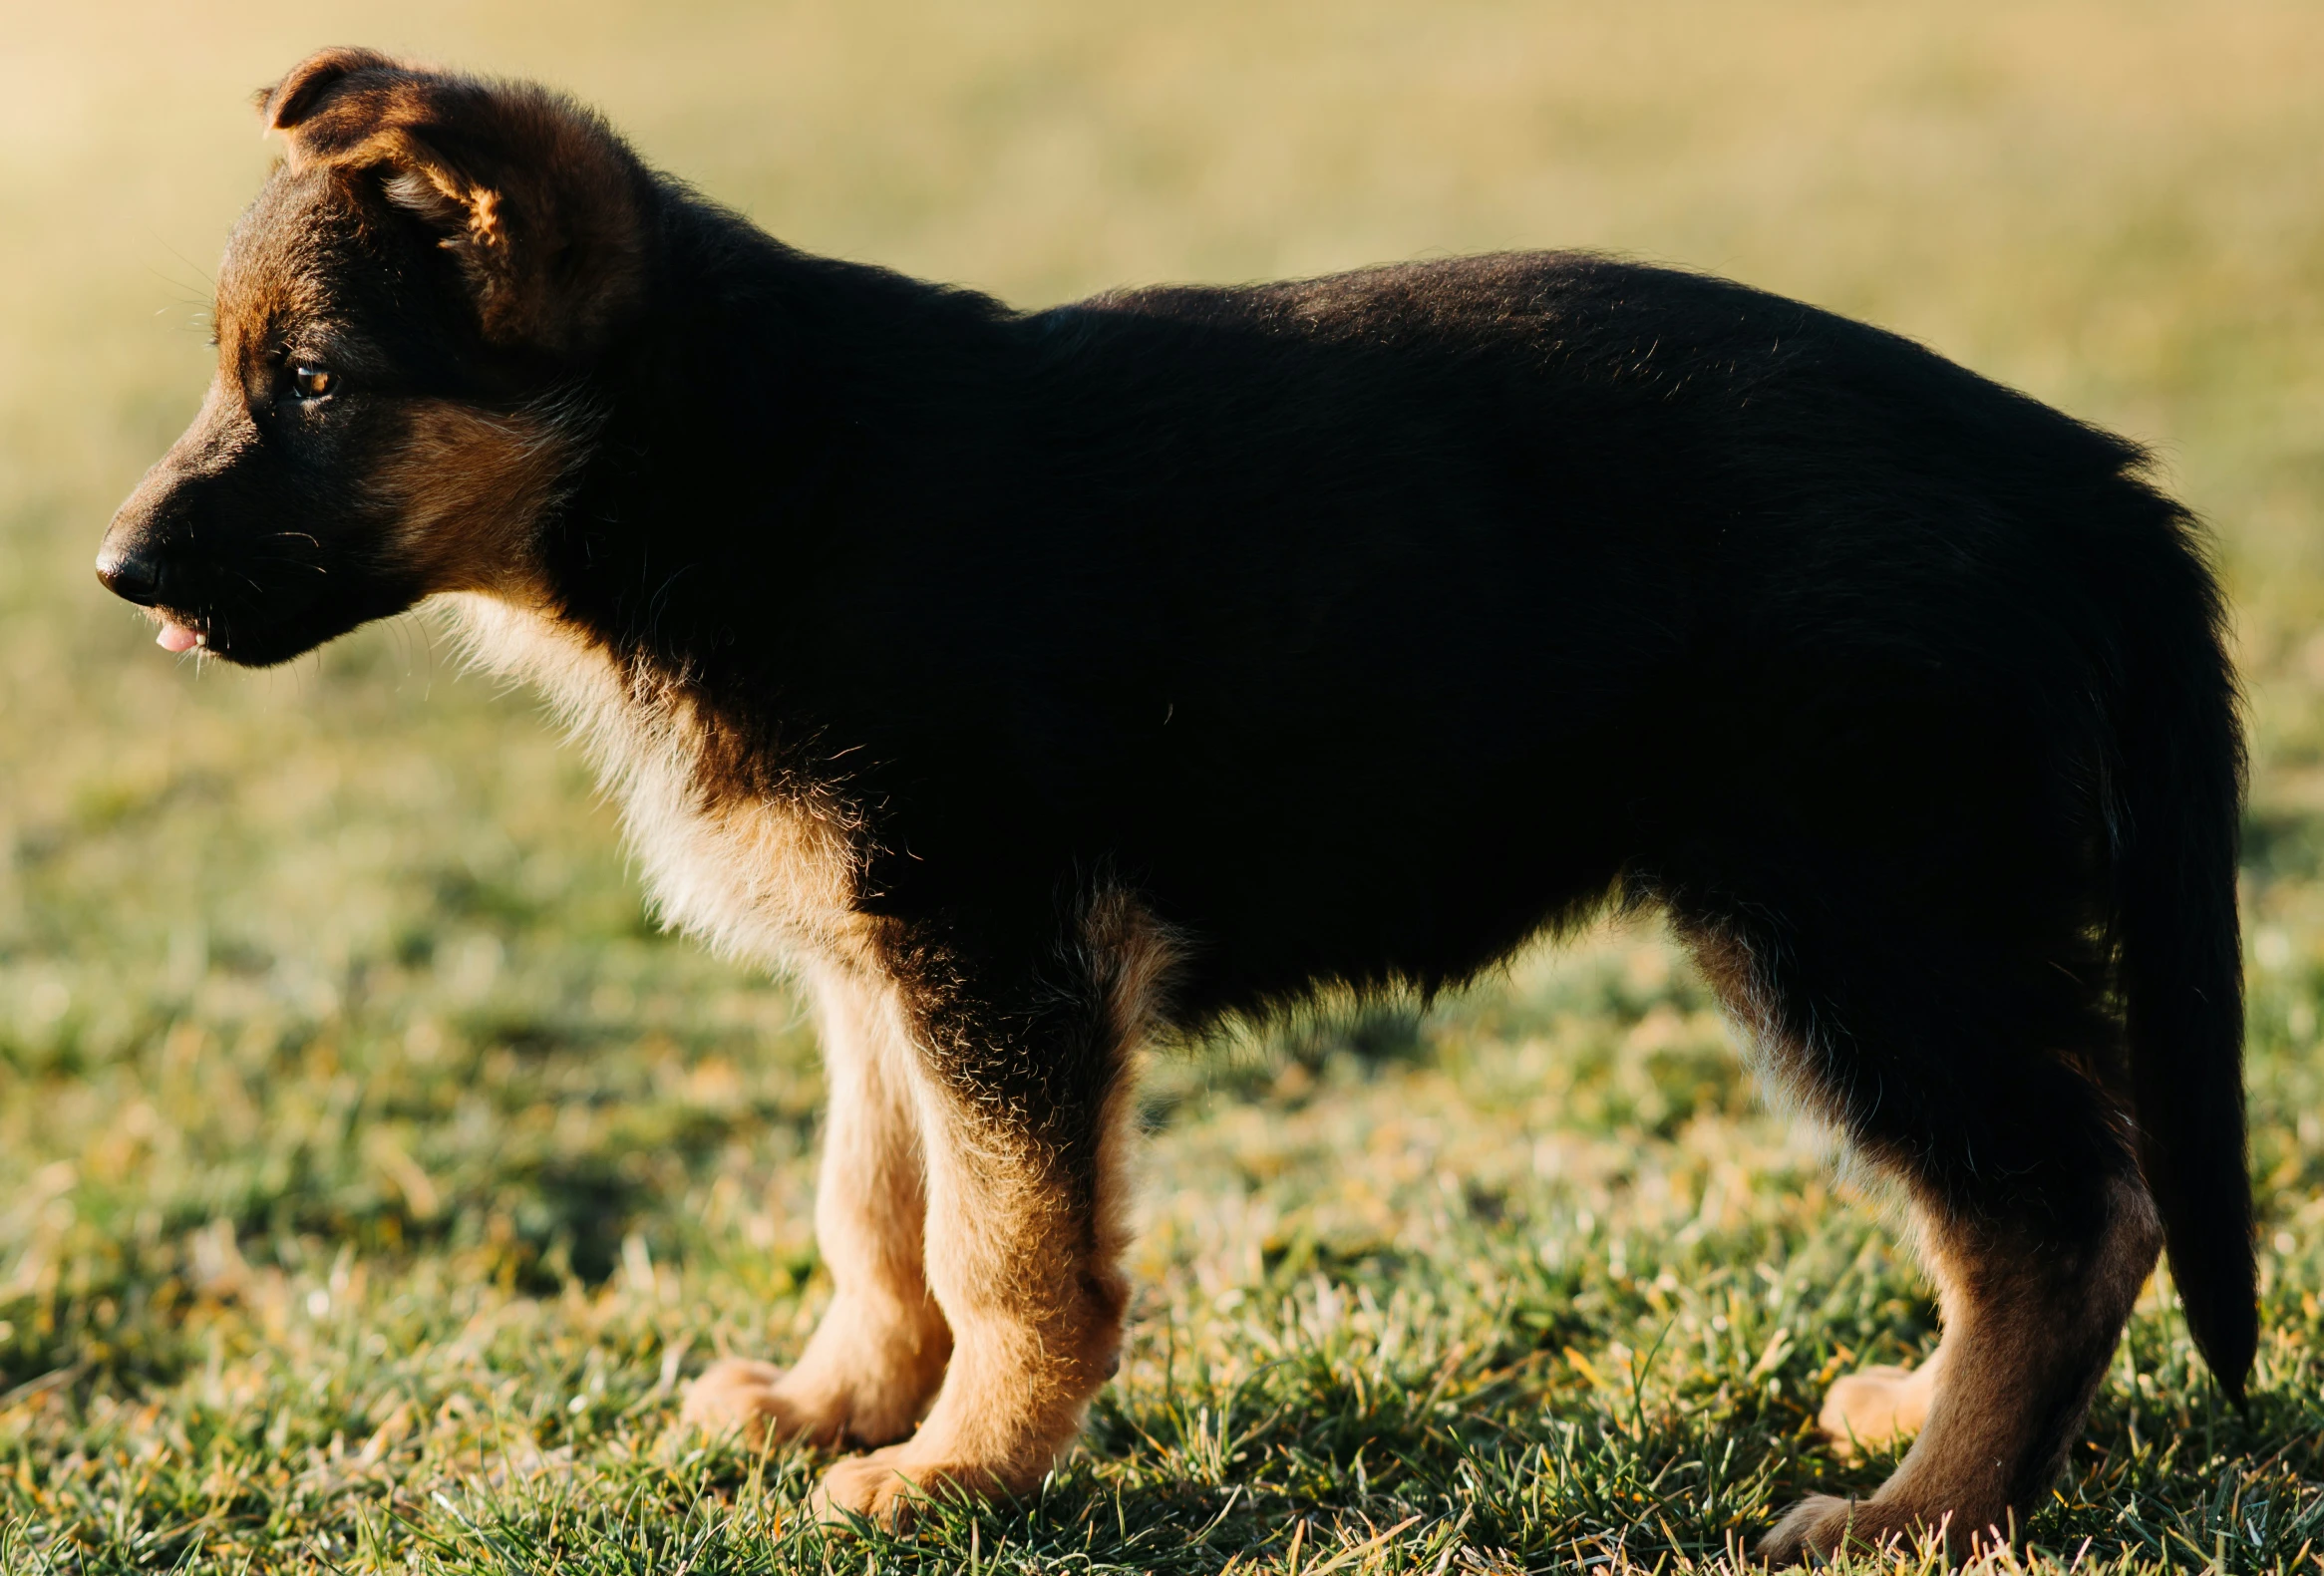 a brown and black puppy stands in a grassy area